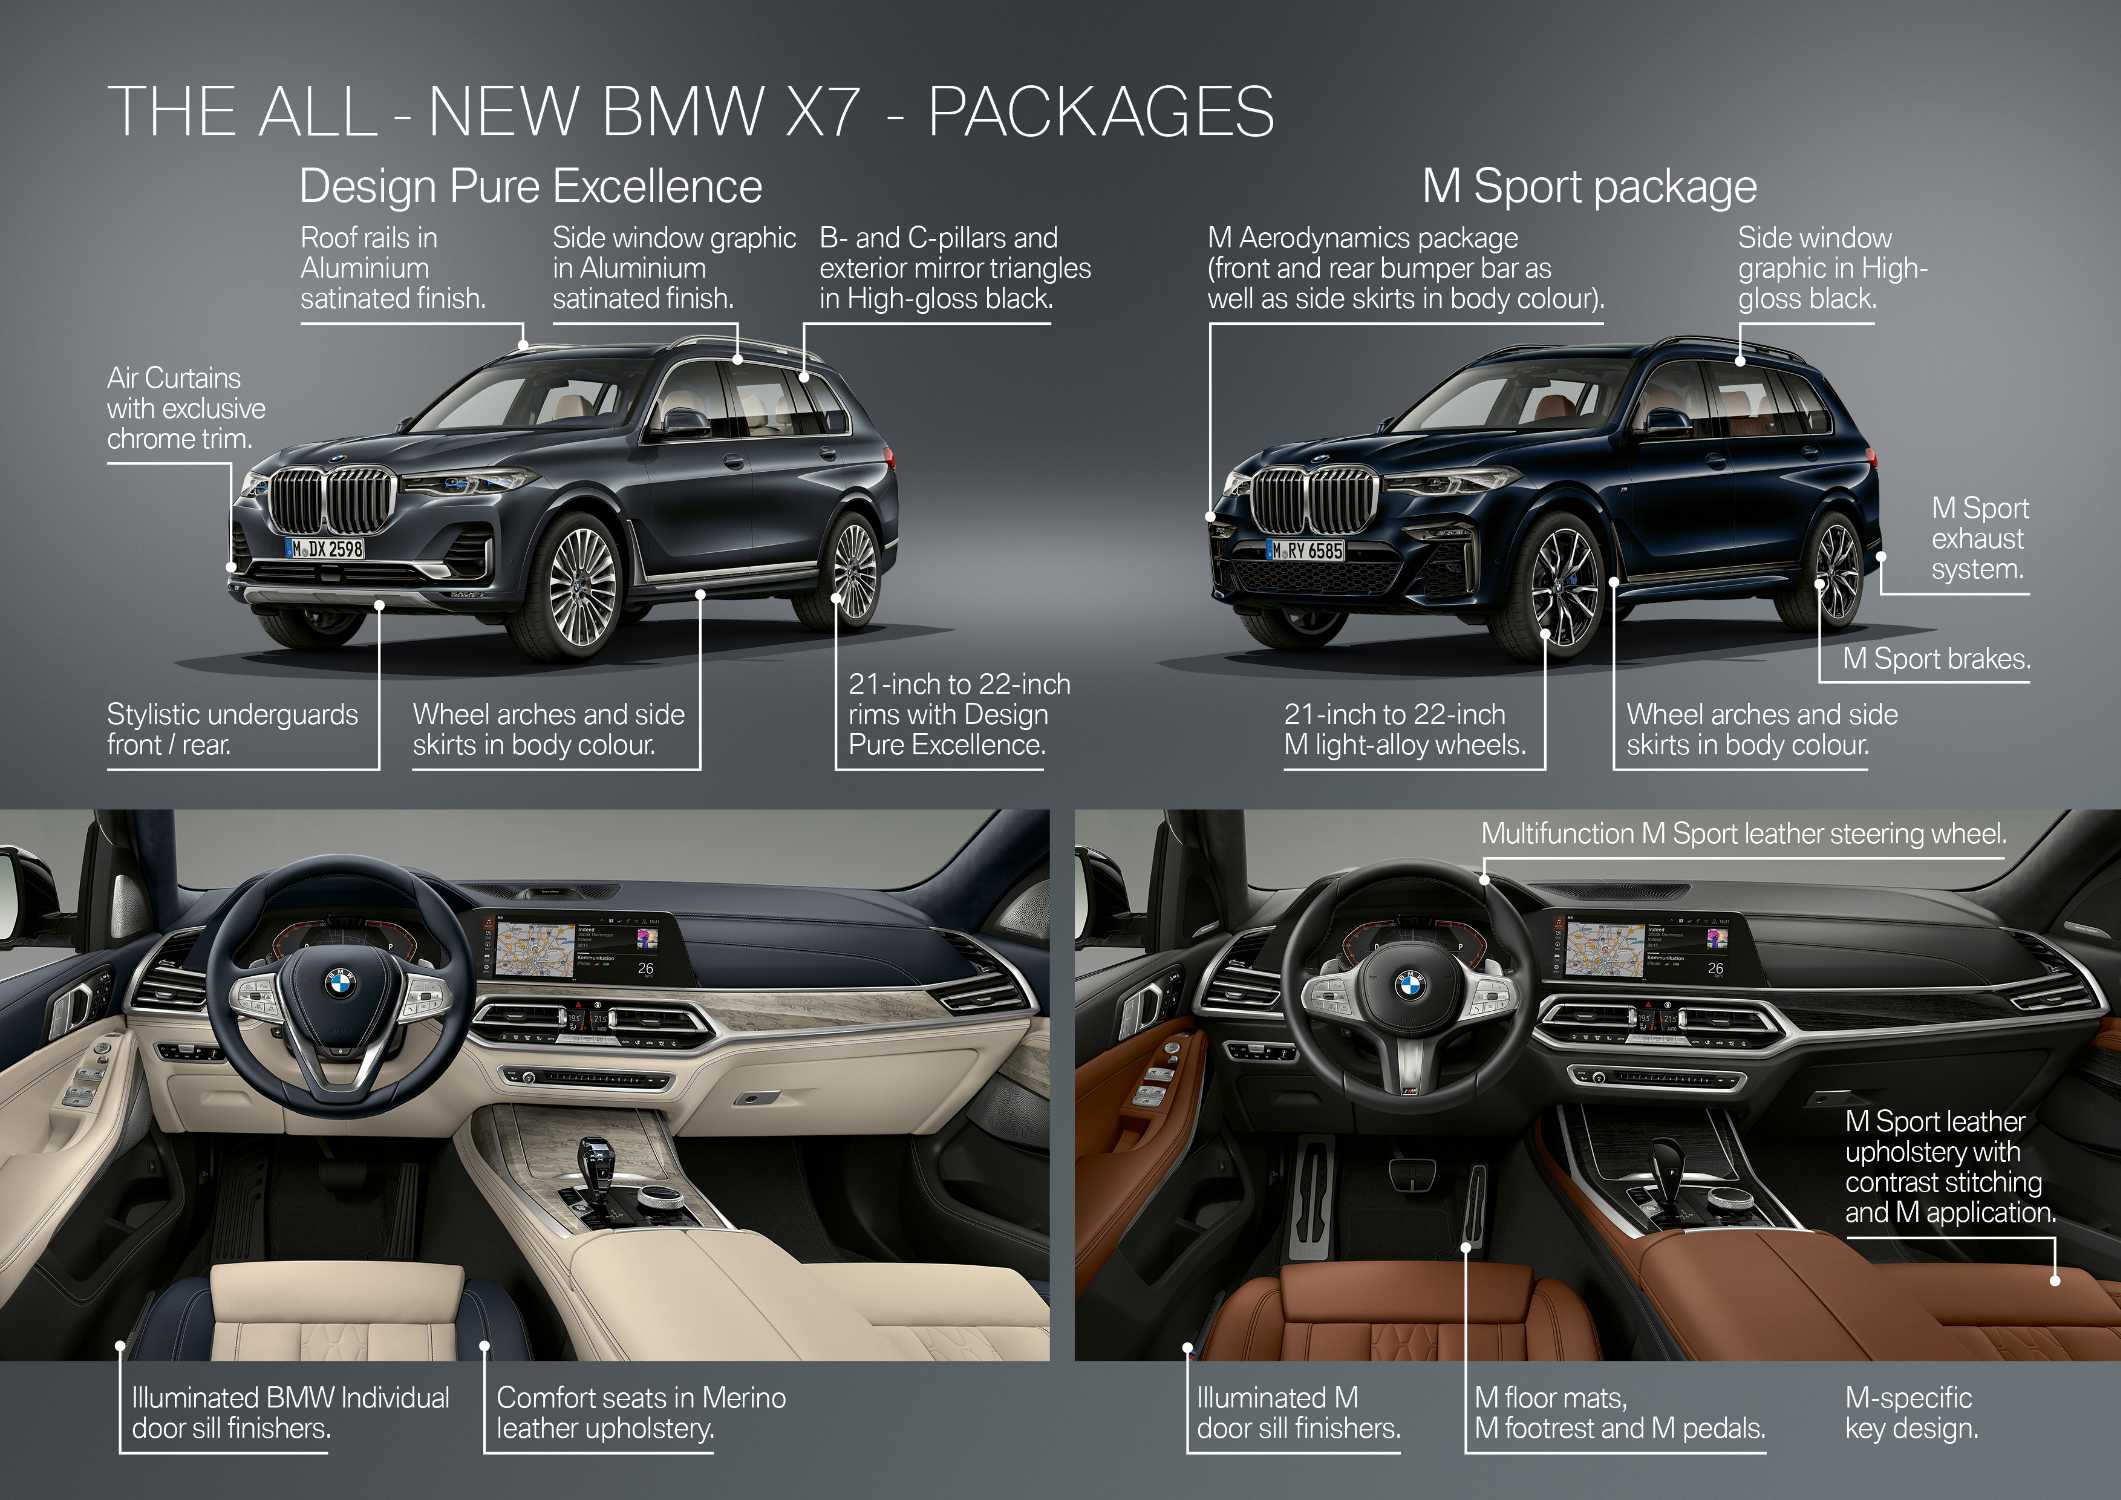 The first-ever BMW X7 - Product highlights (10/2018).